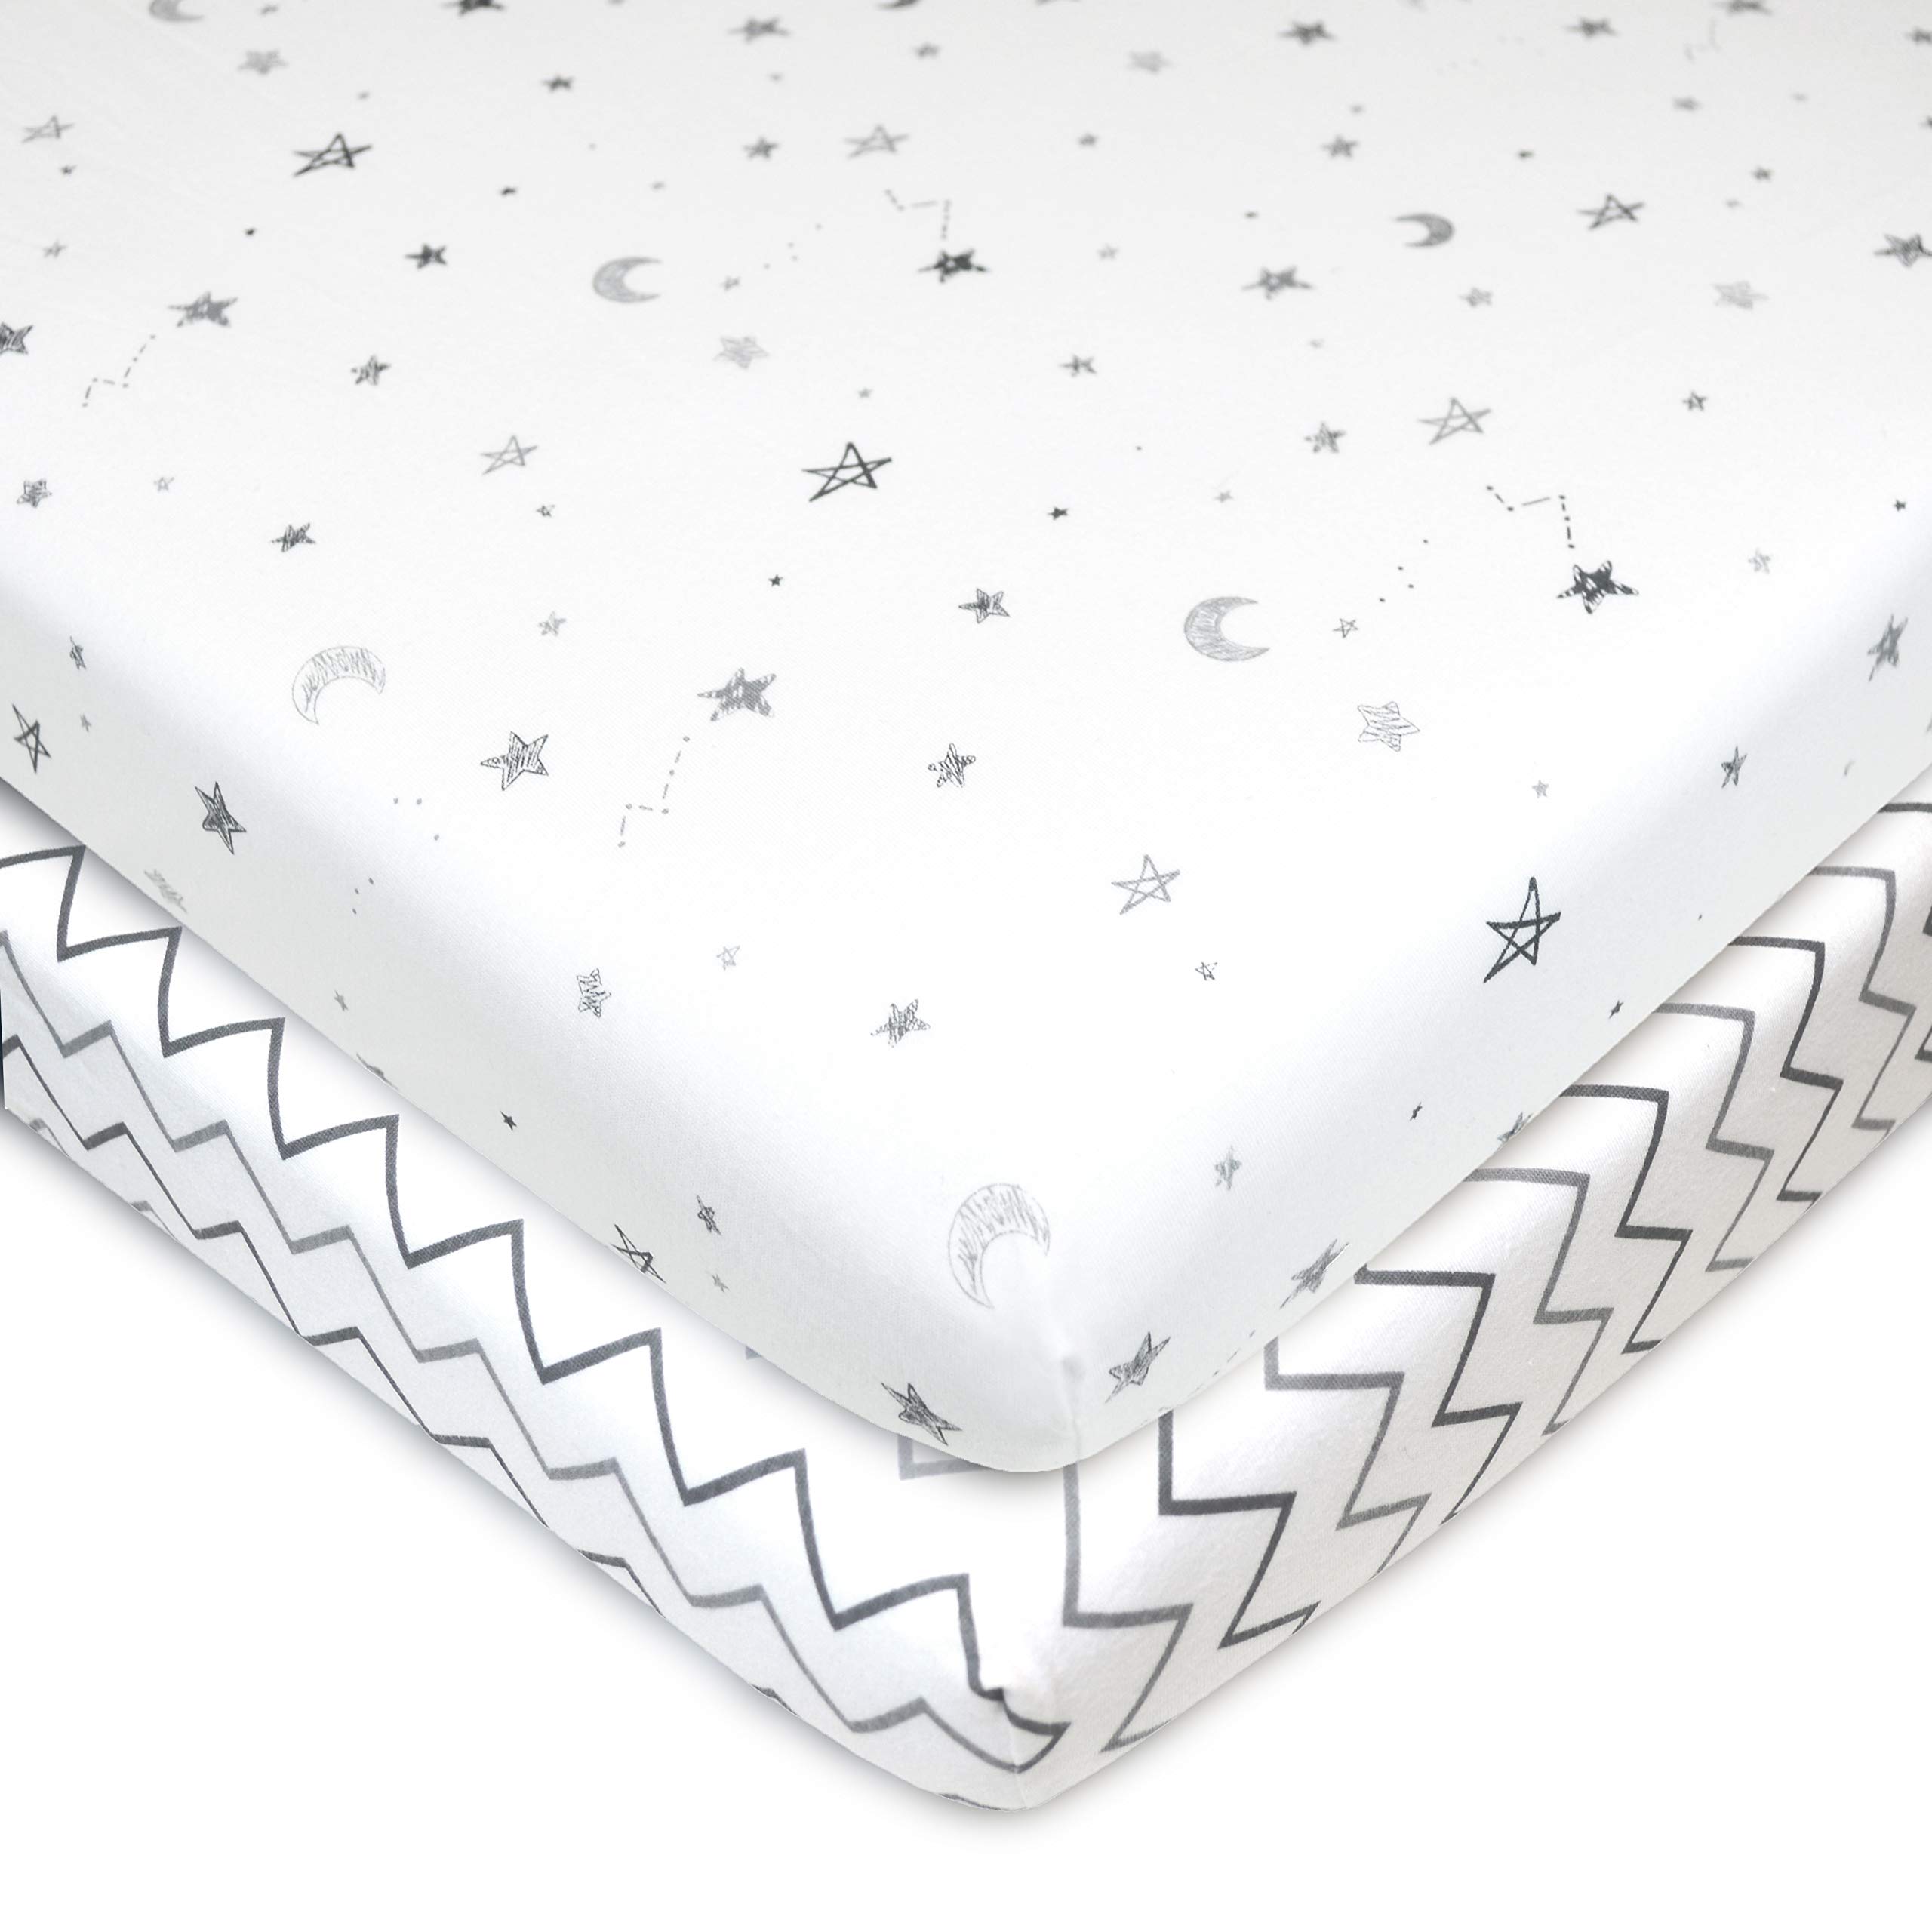 American Baby Company Printed 100% Natural Cotton Jersey Knit Fitted Portable/Mini-Crib Sheet, Grey Stars and Zigzag, Soft Breathable, for Boys and Girls, Pack of 2